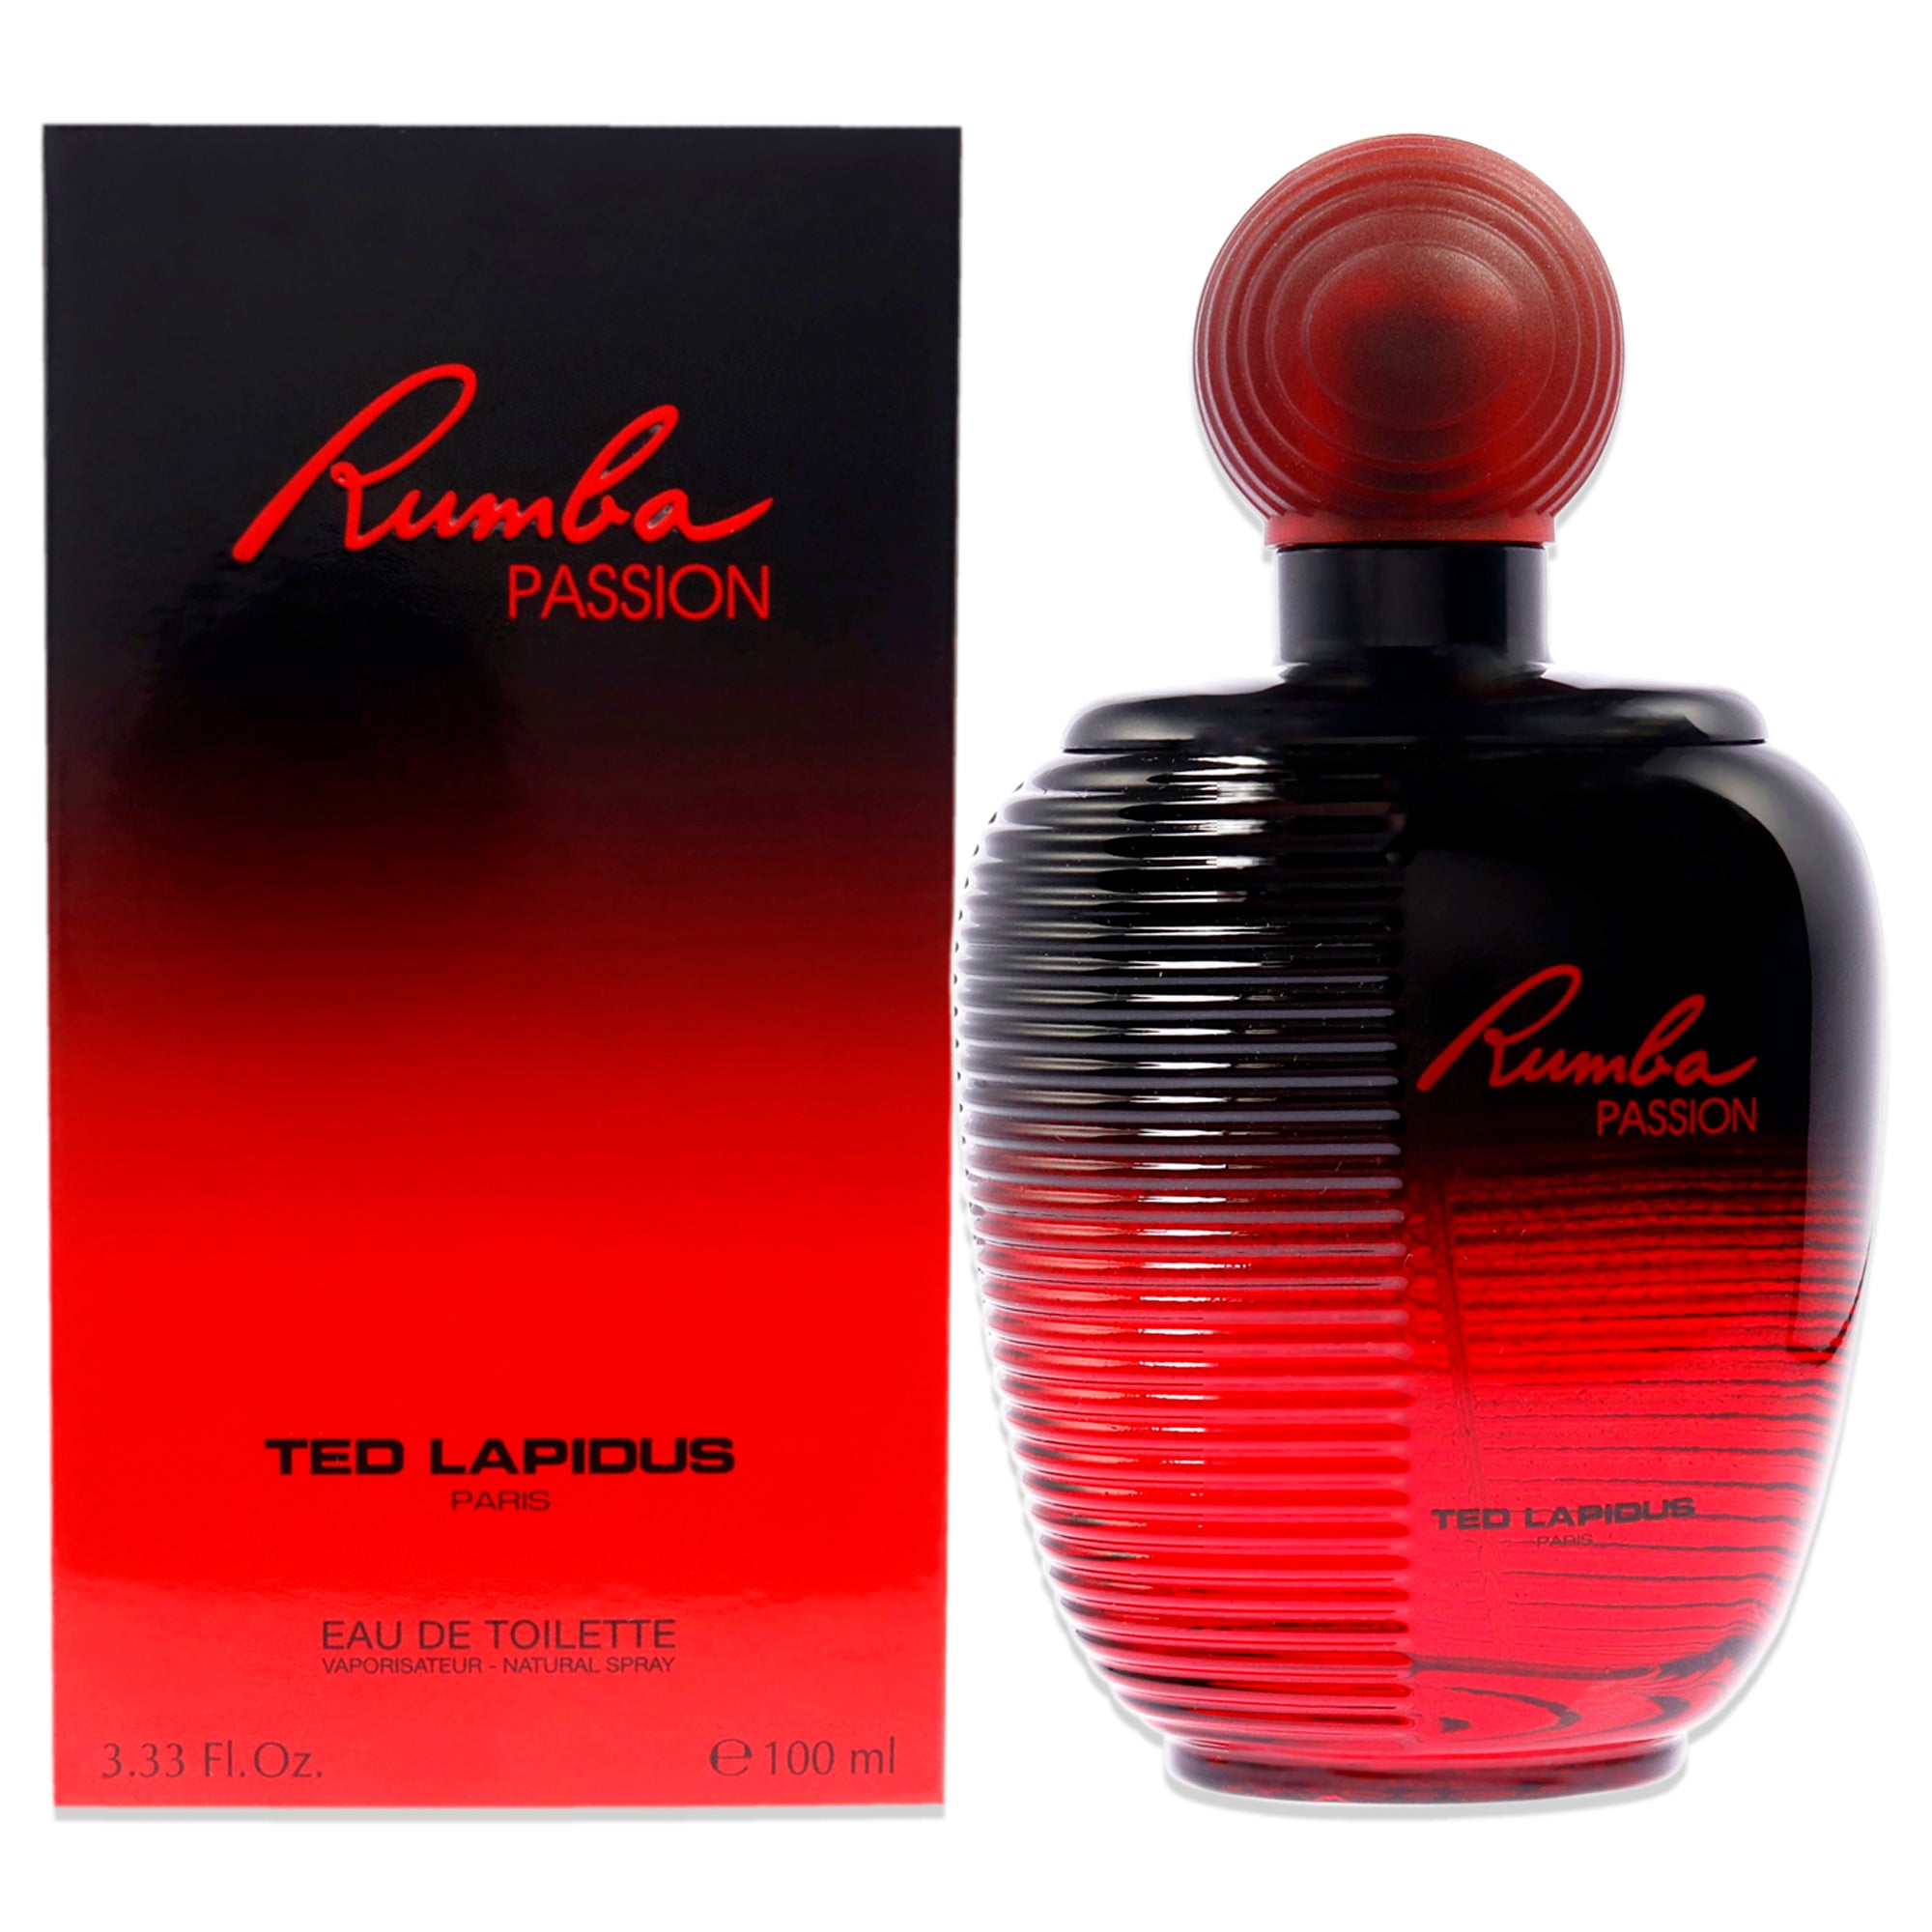 RUMBA PASSION BY TED LAPIDUS FOR WOMEN - 3.33 OZ EDT SPRAY